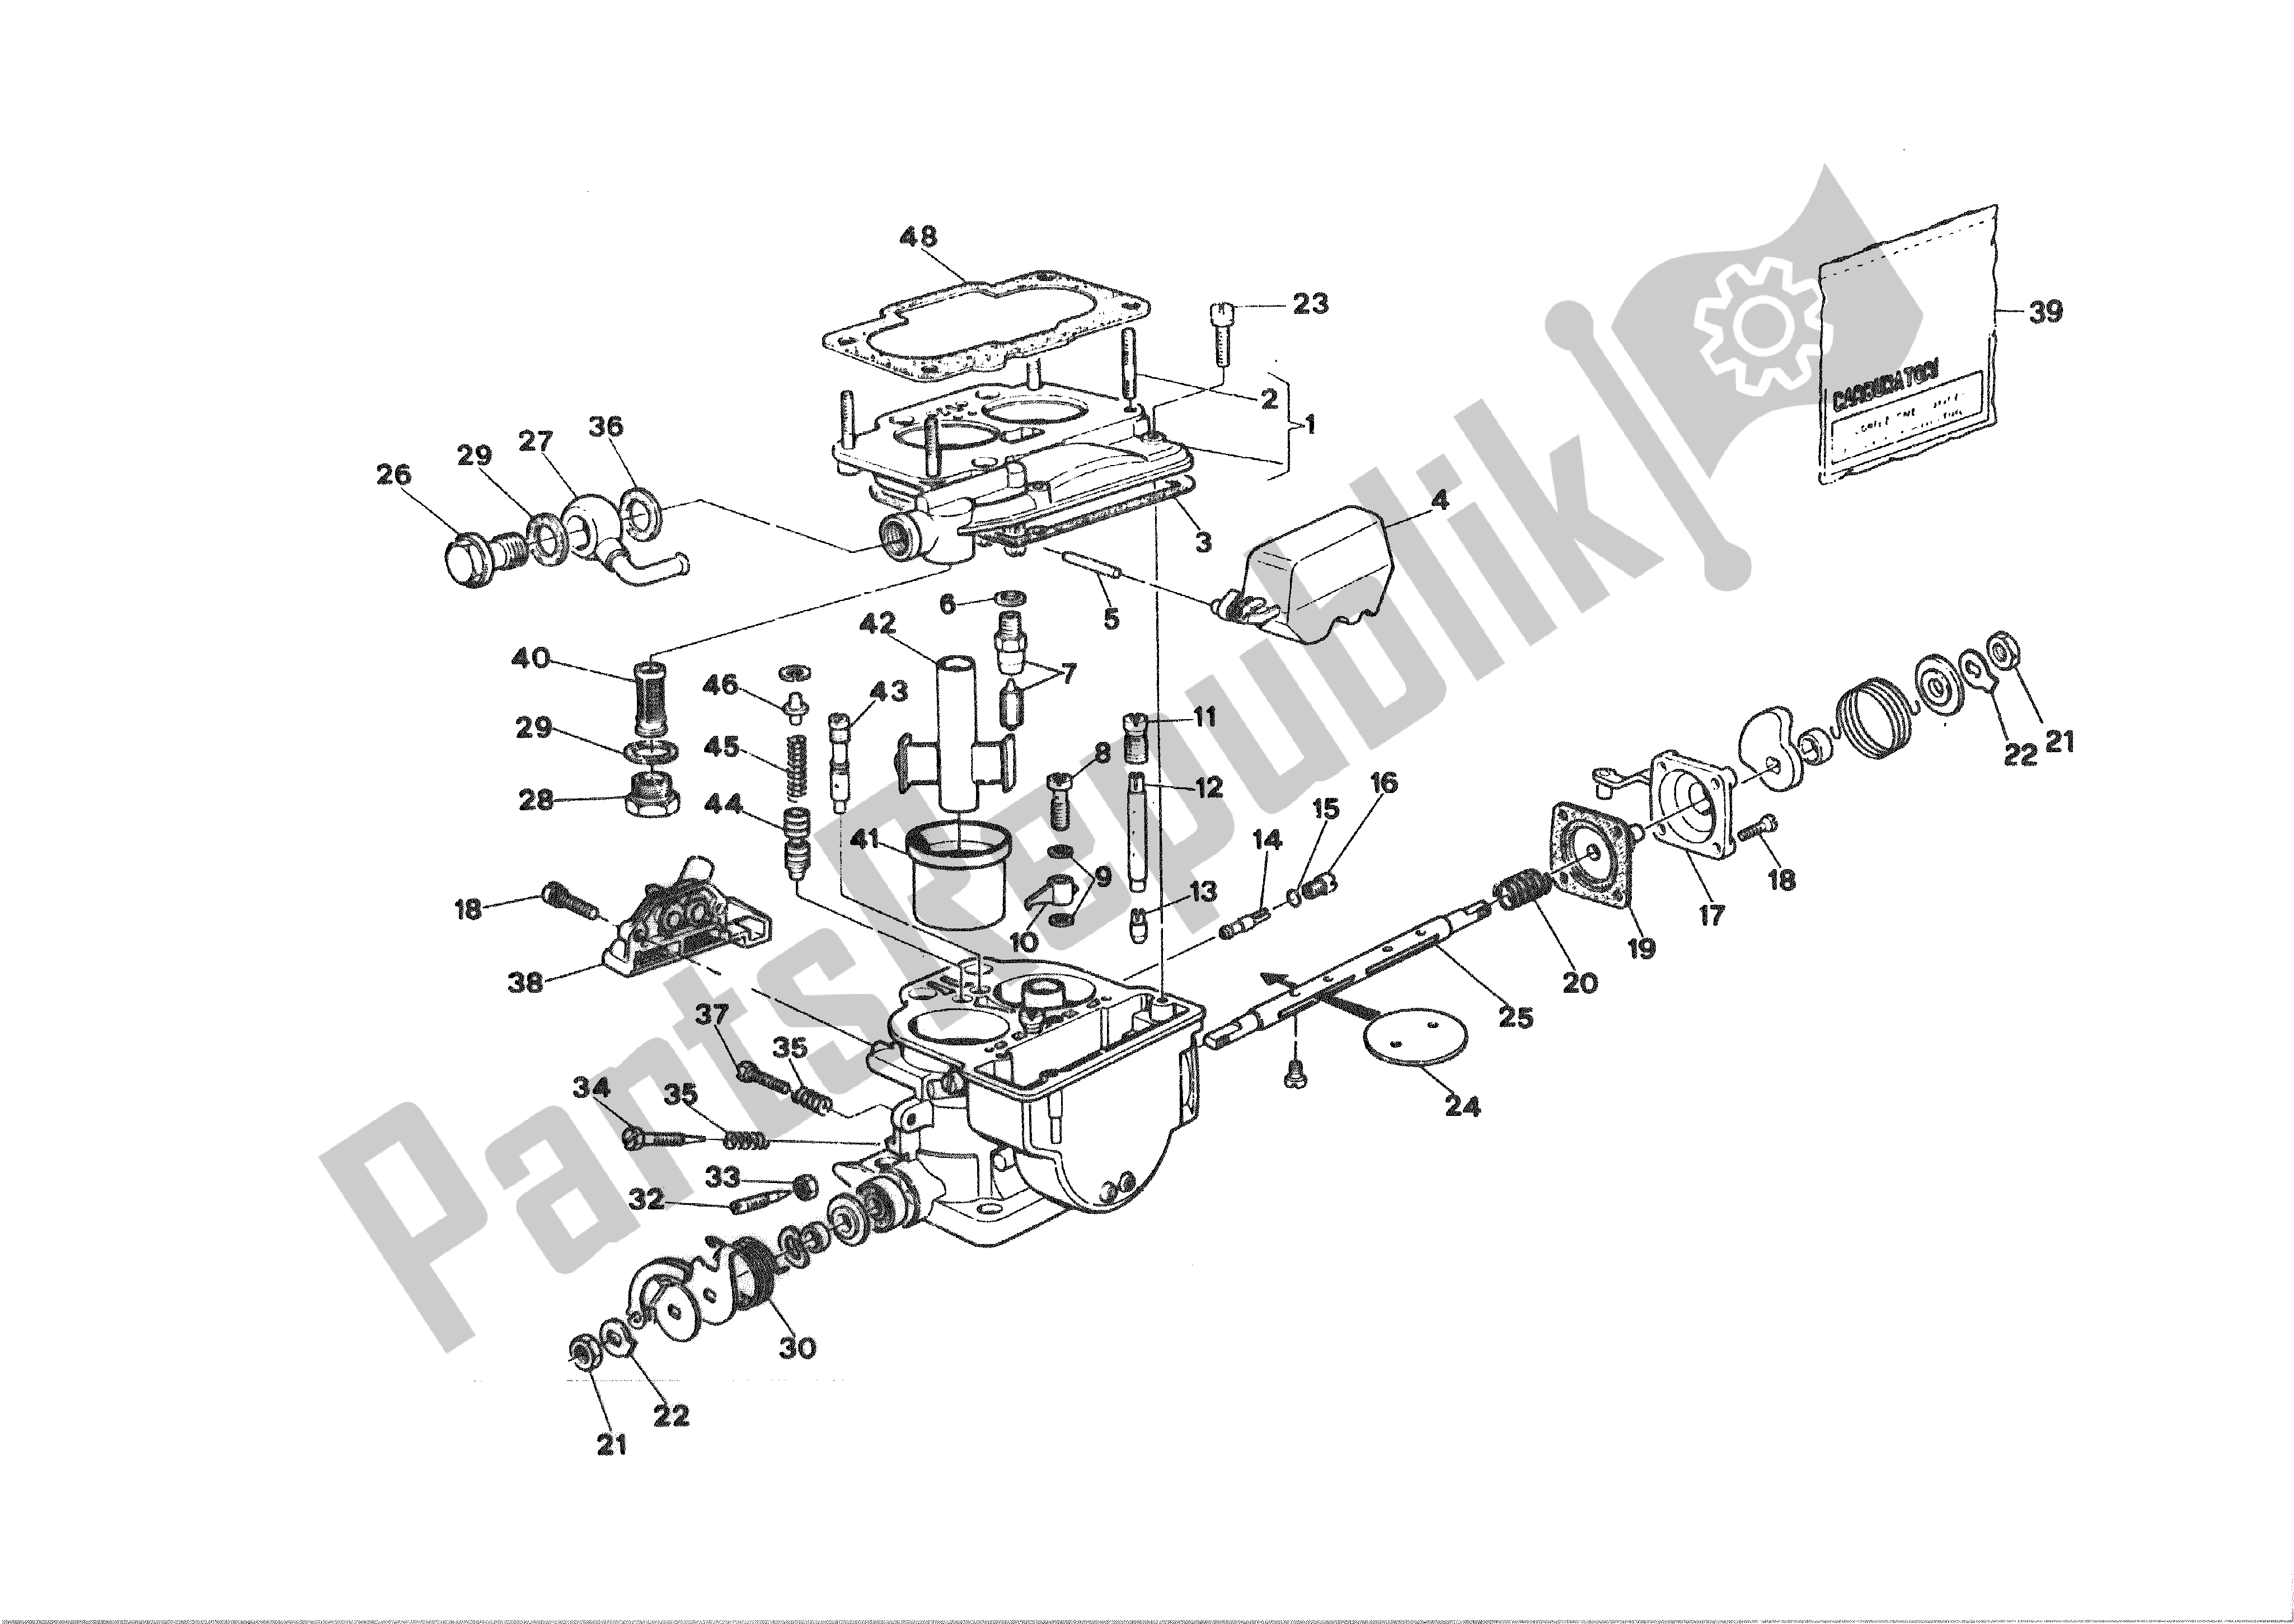 All parts for the Bulll Fl~~ of the Ducati 750S 1989 - 1990